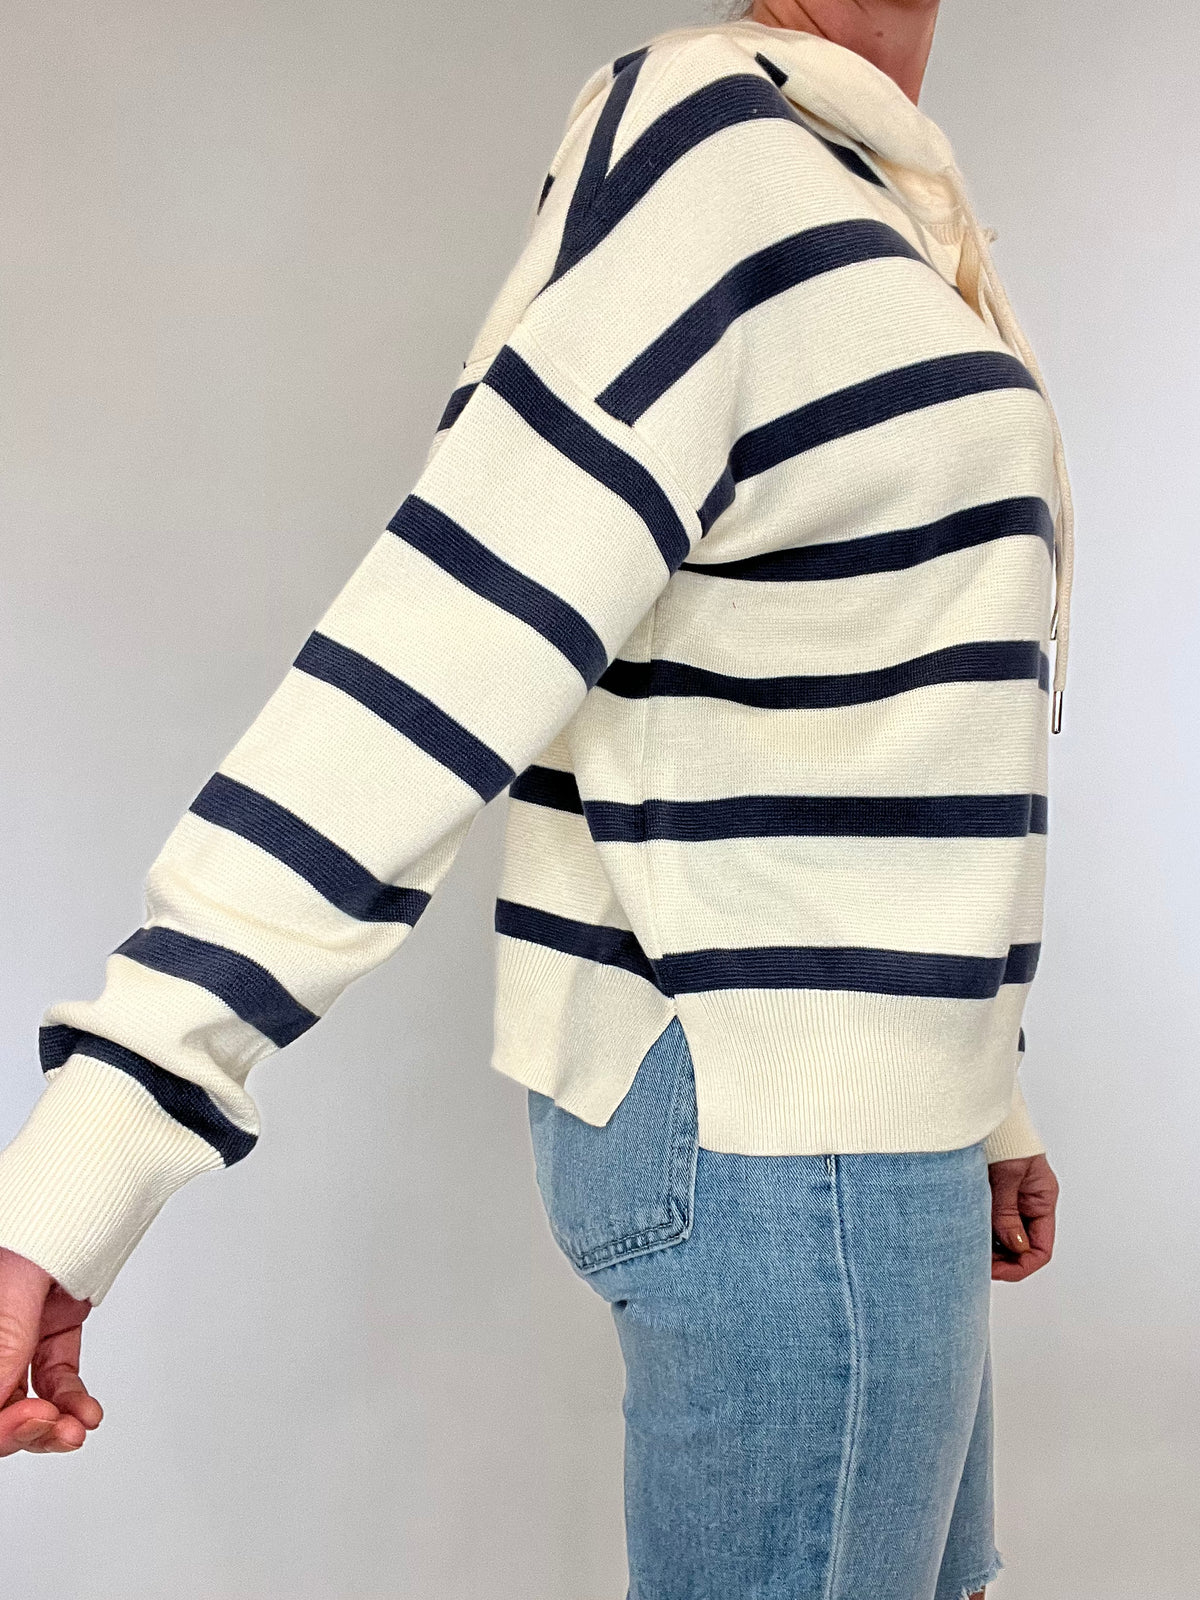 Sail away in style with The Nautical Hoodie. This luxurious heavy-weight, fine knit sweater features elegant nautical stripes in navy and ecru, exuding effortless chic. Leave the sweatshirt behind and elevate your wardrobe with this gorgeous piece.